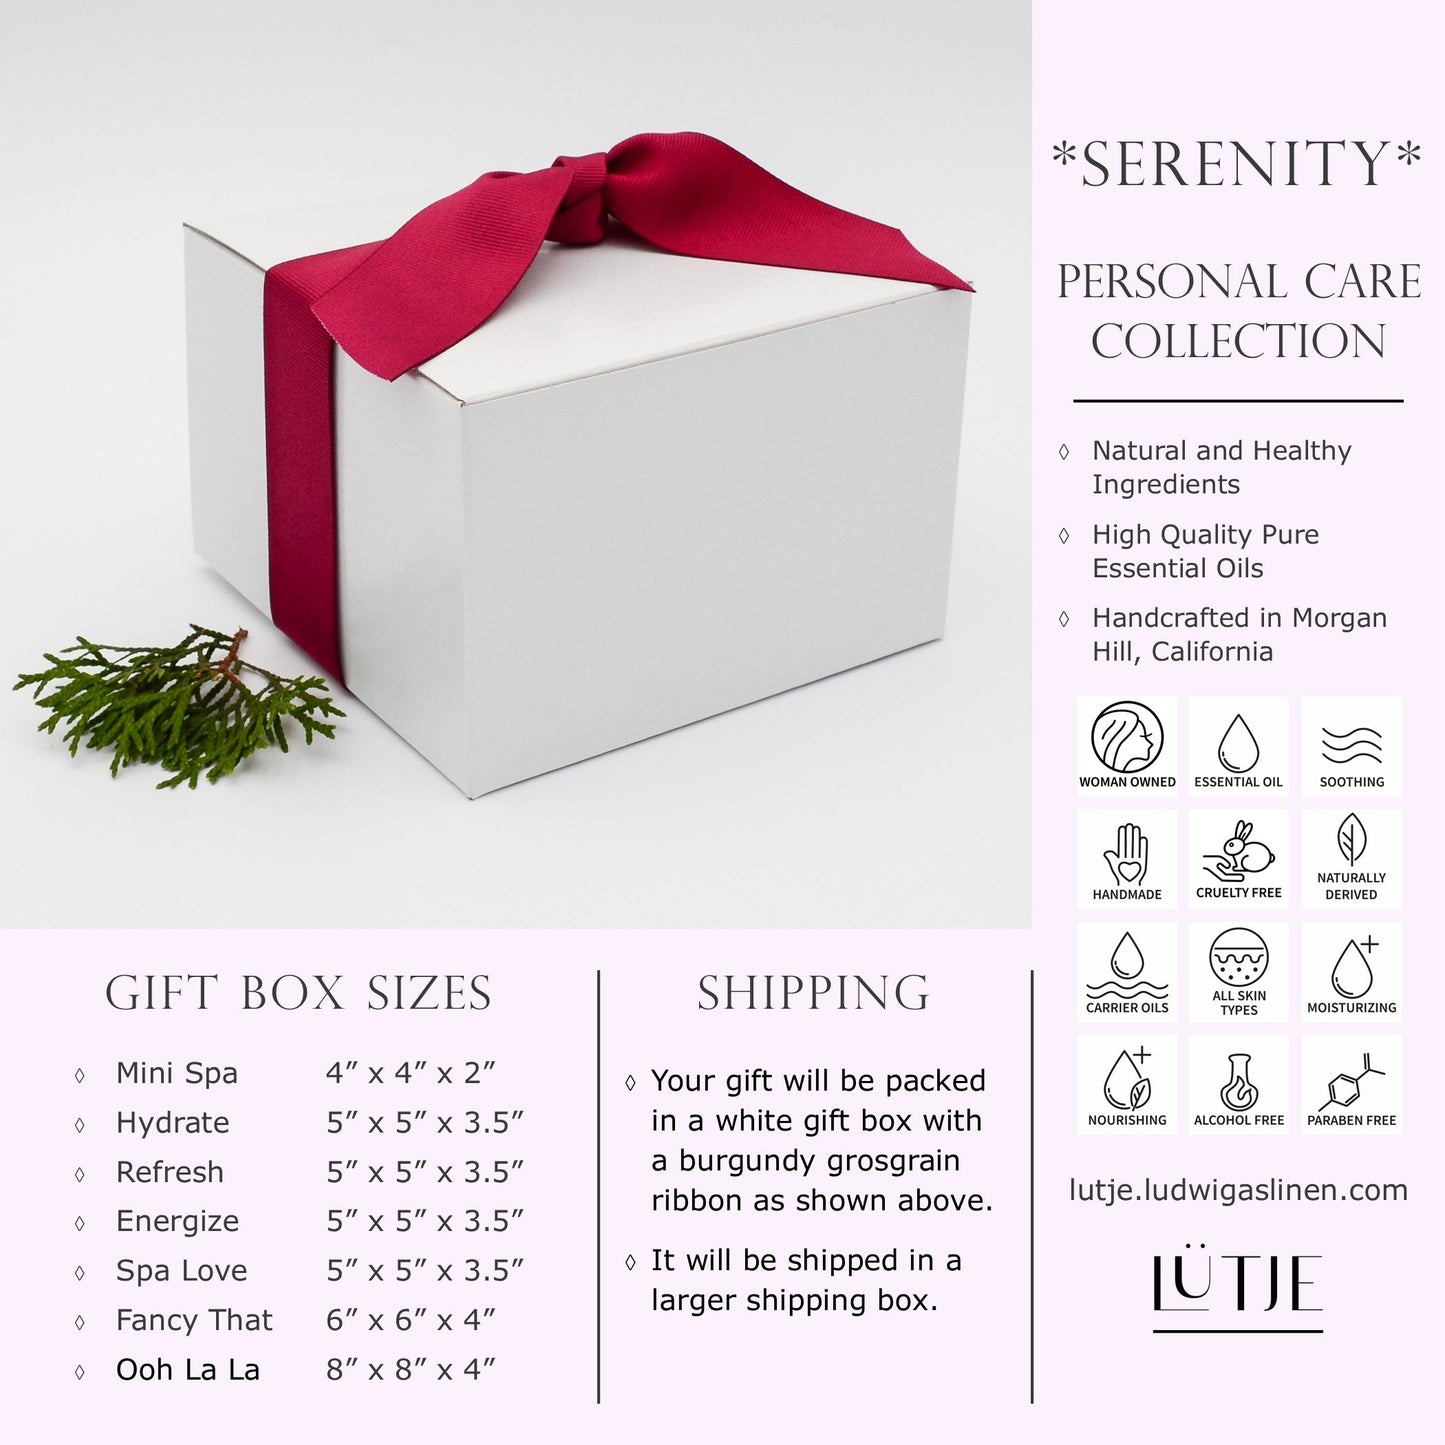 Gift Box for women Violet & Lemongrass Arise Collection shipping and general information including made with natural and healthy ingredients,woman owned, handmade, cruelty free, naturally derived, pure essential oils, all skin types, moisturizing, soothing, nourishing, alcohol free and paraben free. 